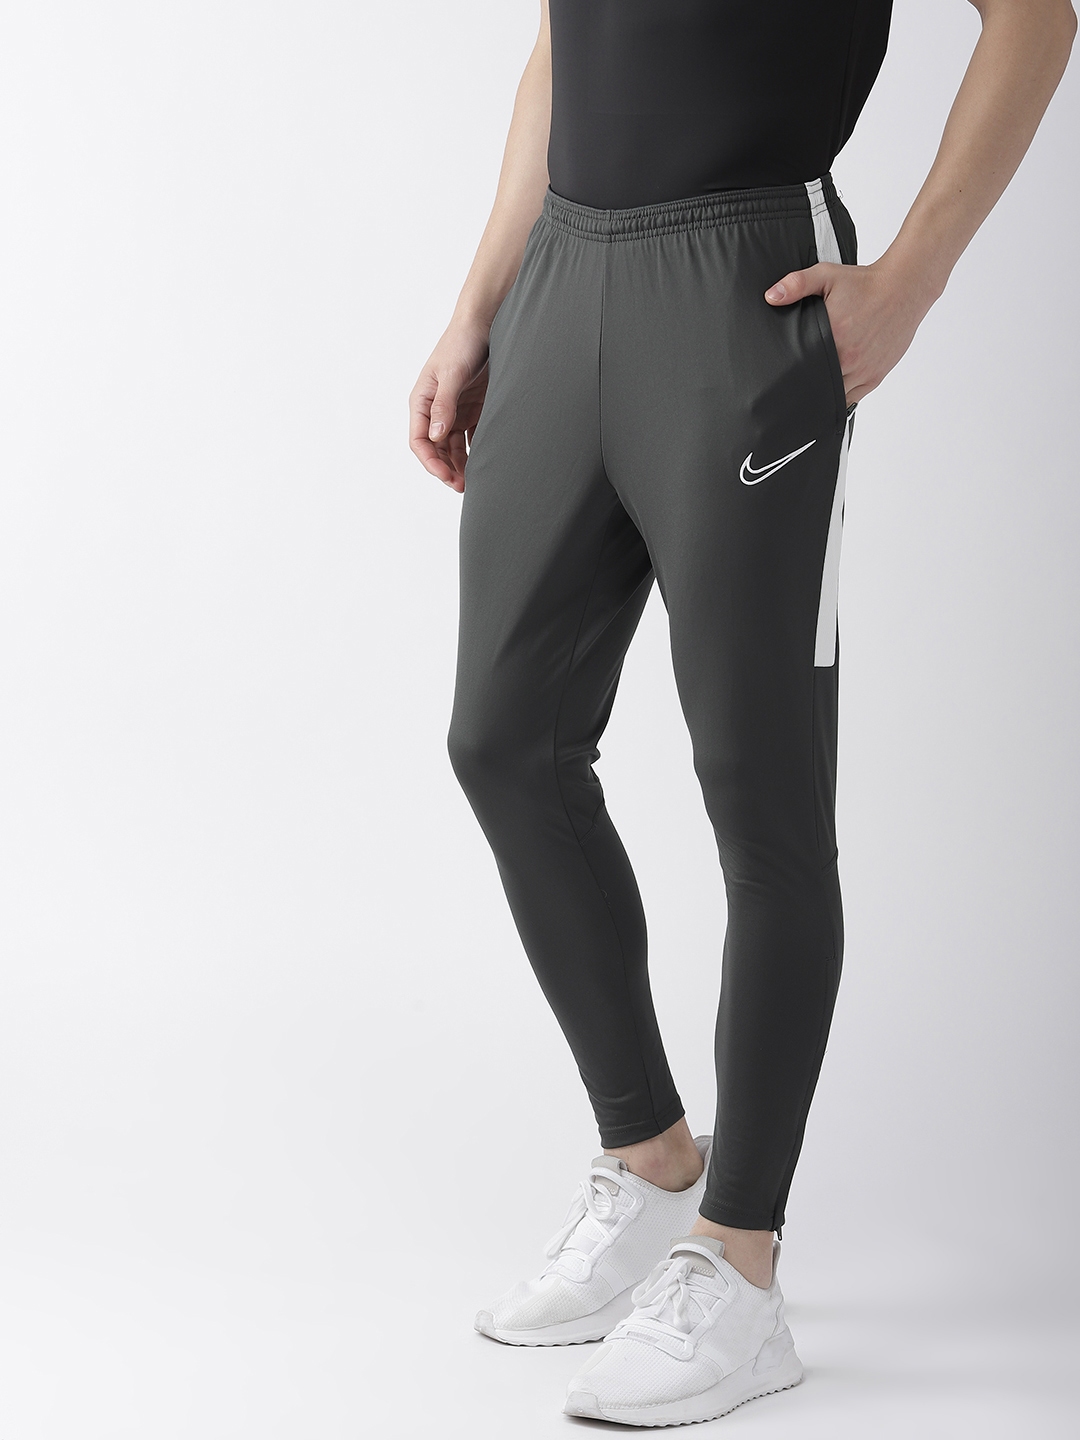 Nike Dri-Fit Tapered Training Pants | Sportspower Zorich Group